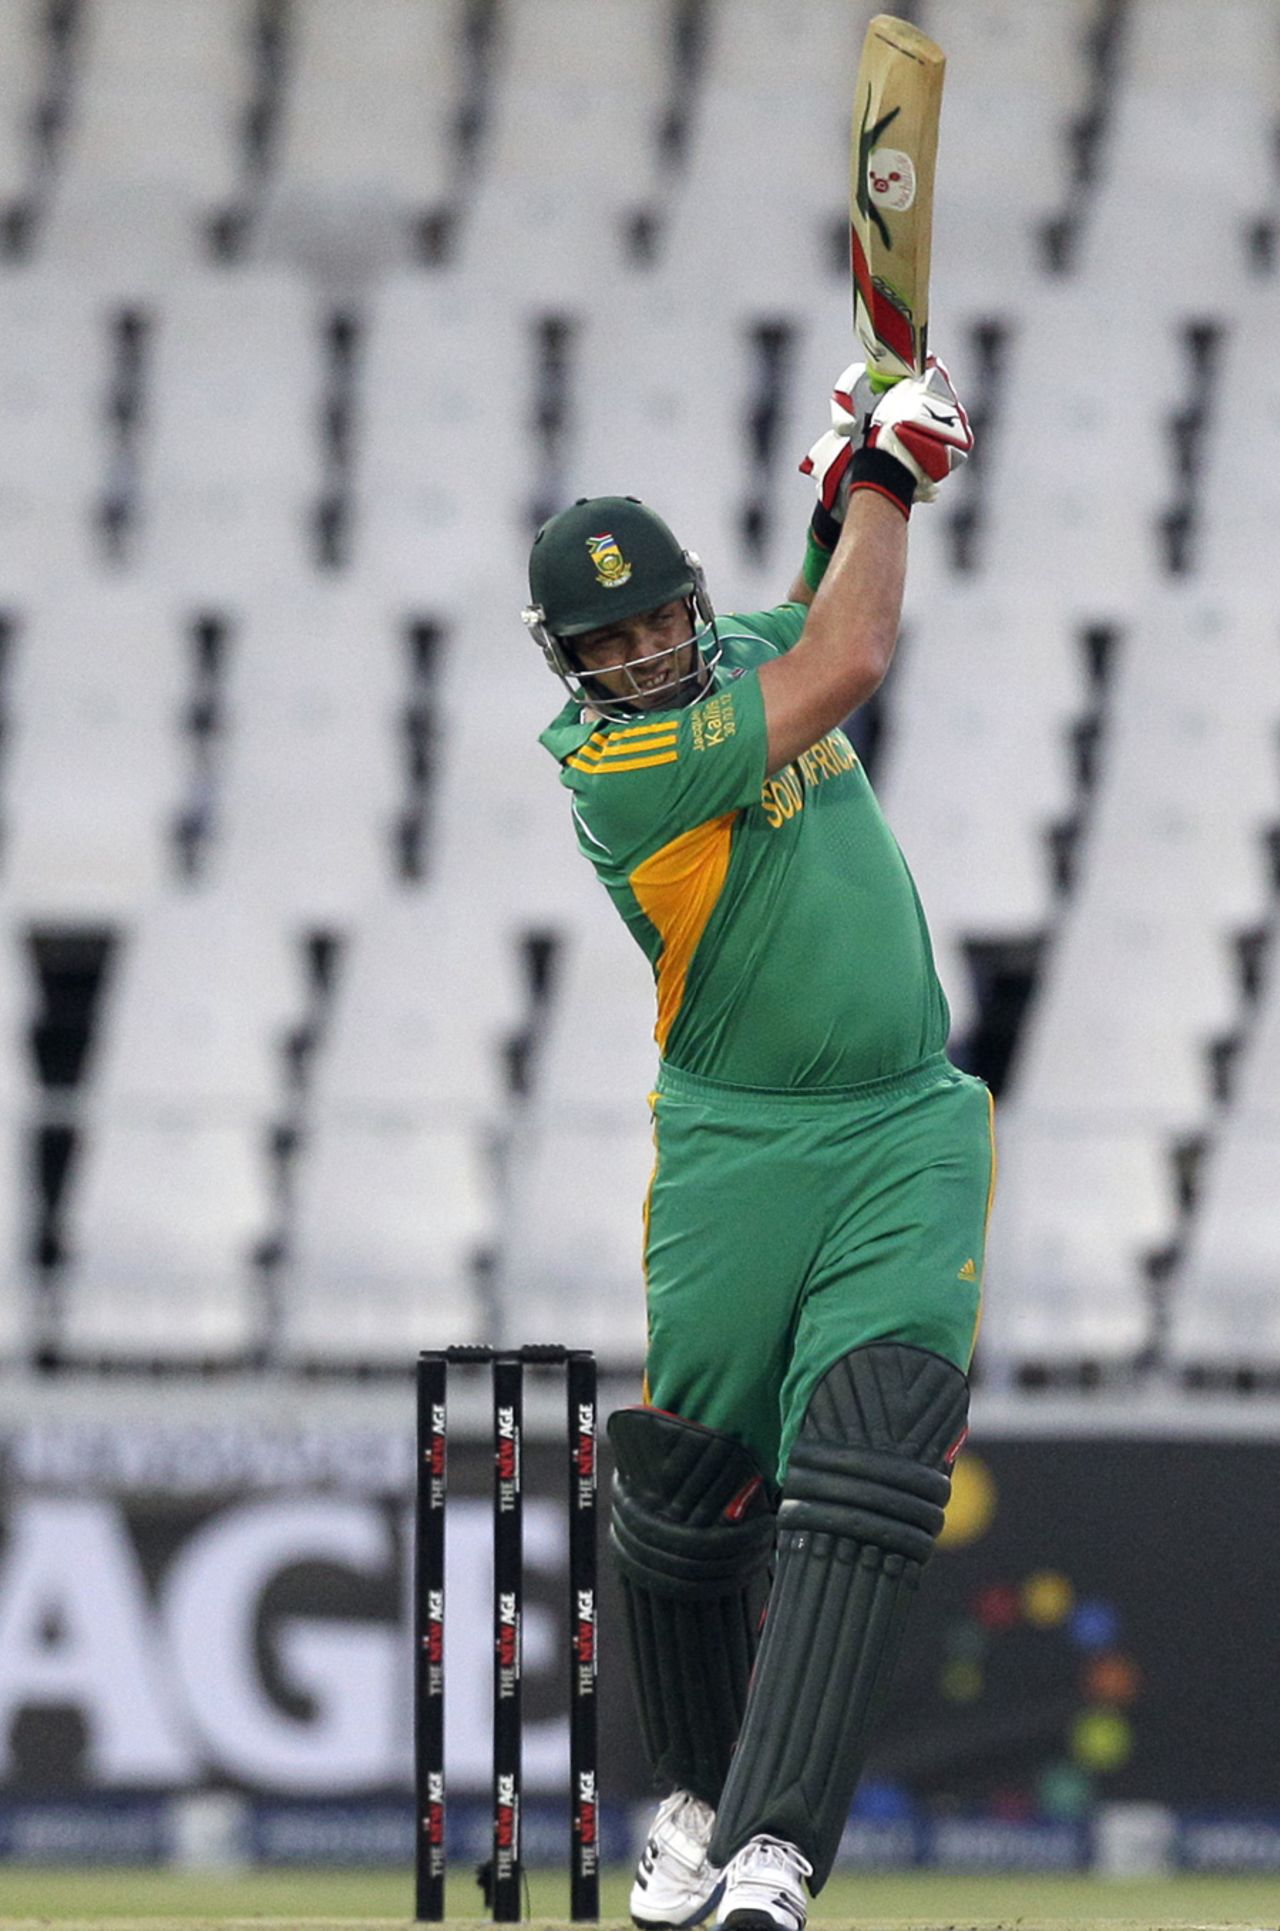 Jacques Kallis forces one past mid-on, South Africa v India, Only T20I, Johannesburg, March 30, 2012